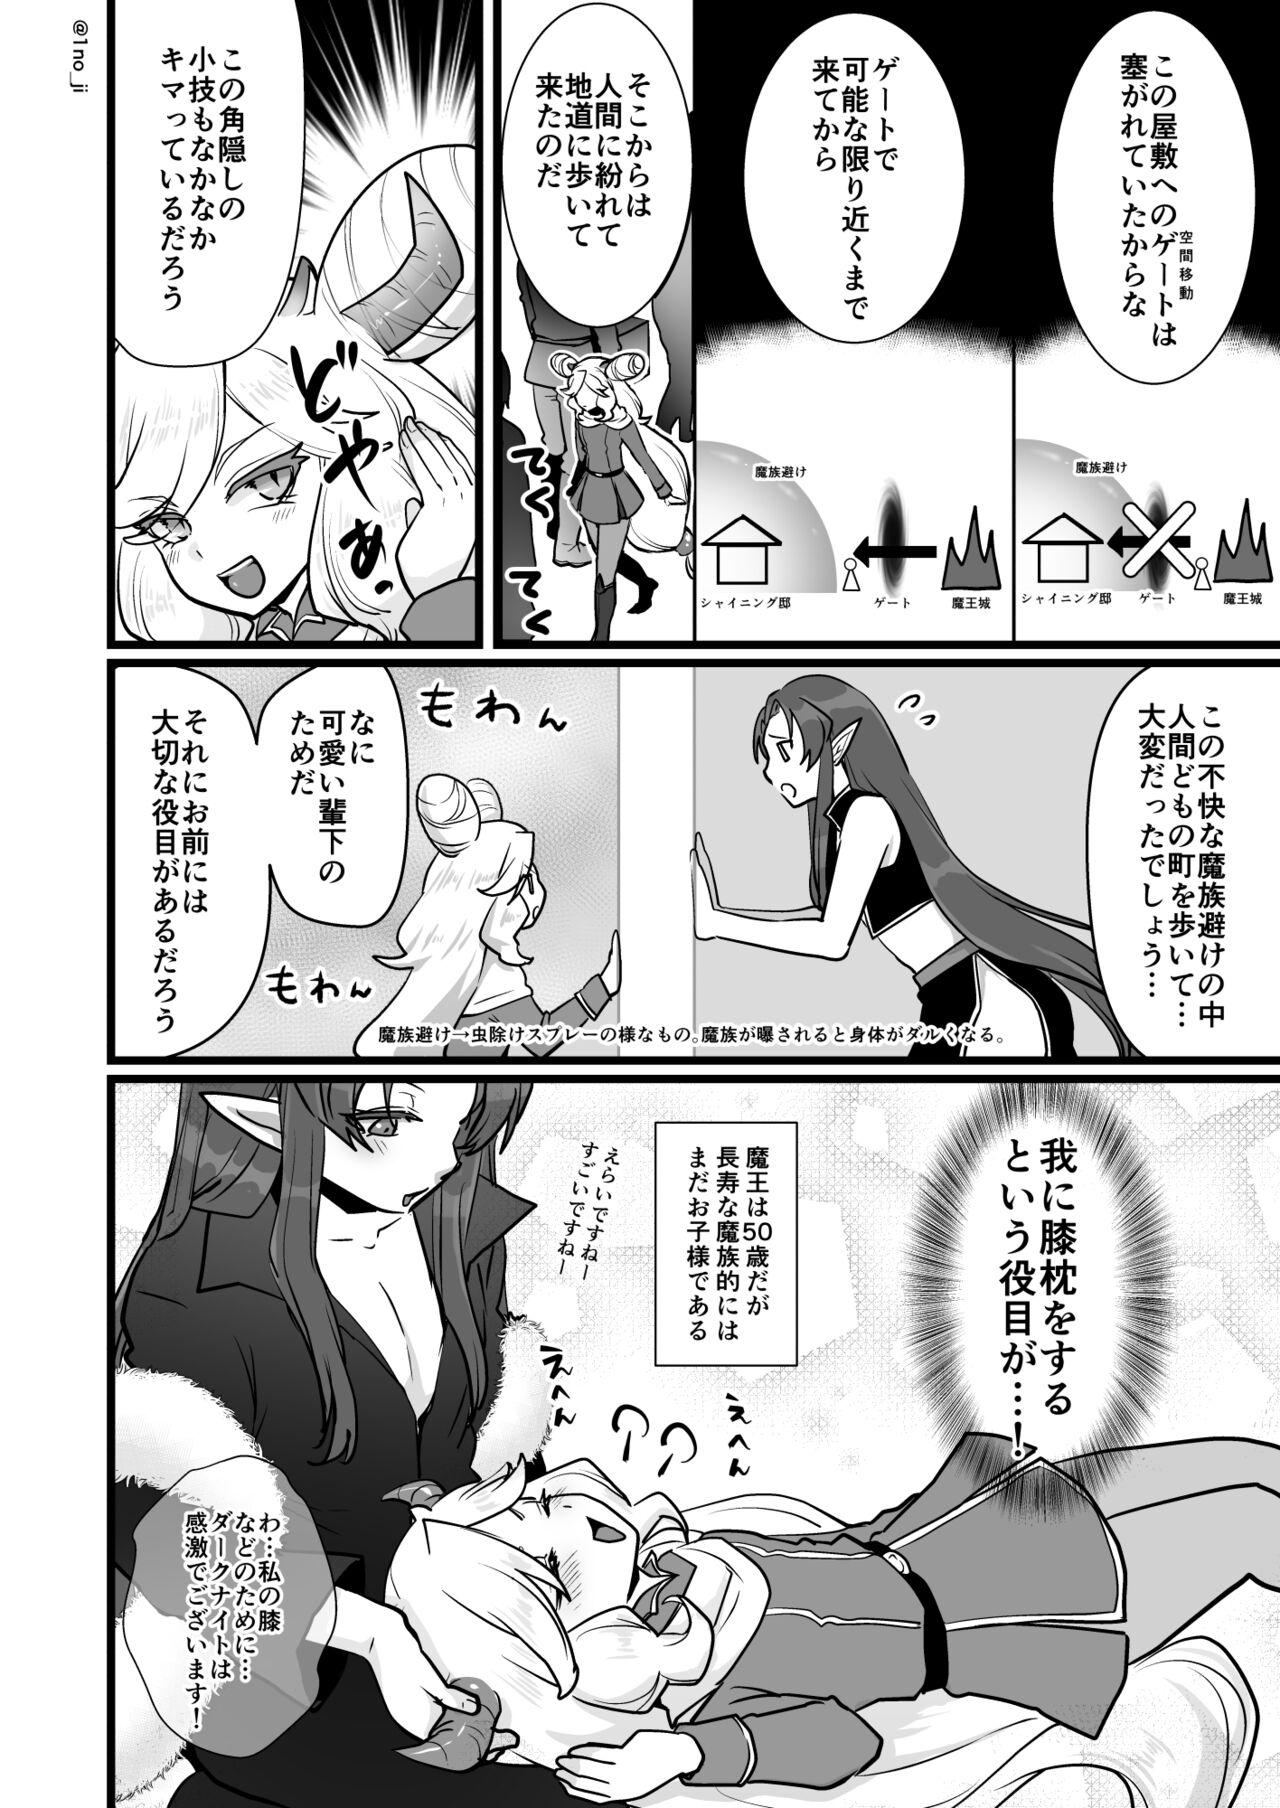 Couch 魔王軍の元幹部♂が勇者に負けてメスにされる話2【ダークナイトさんシリーズ】 - Original Groping - Page 9